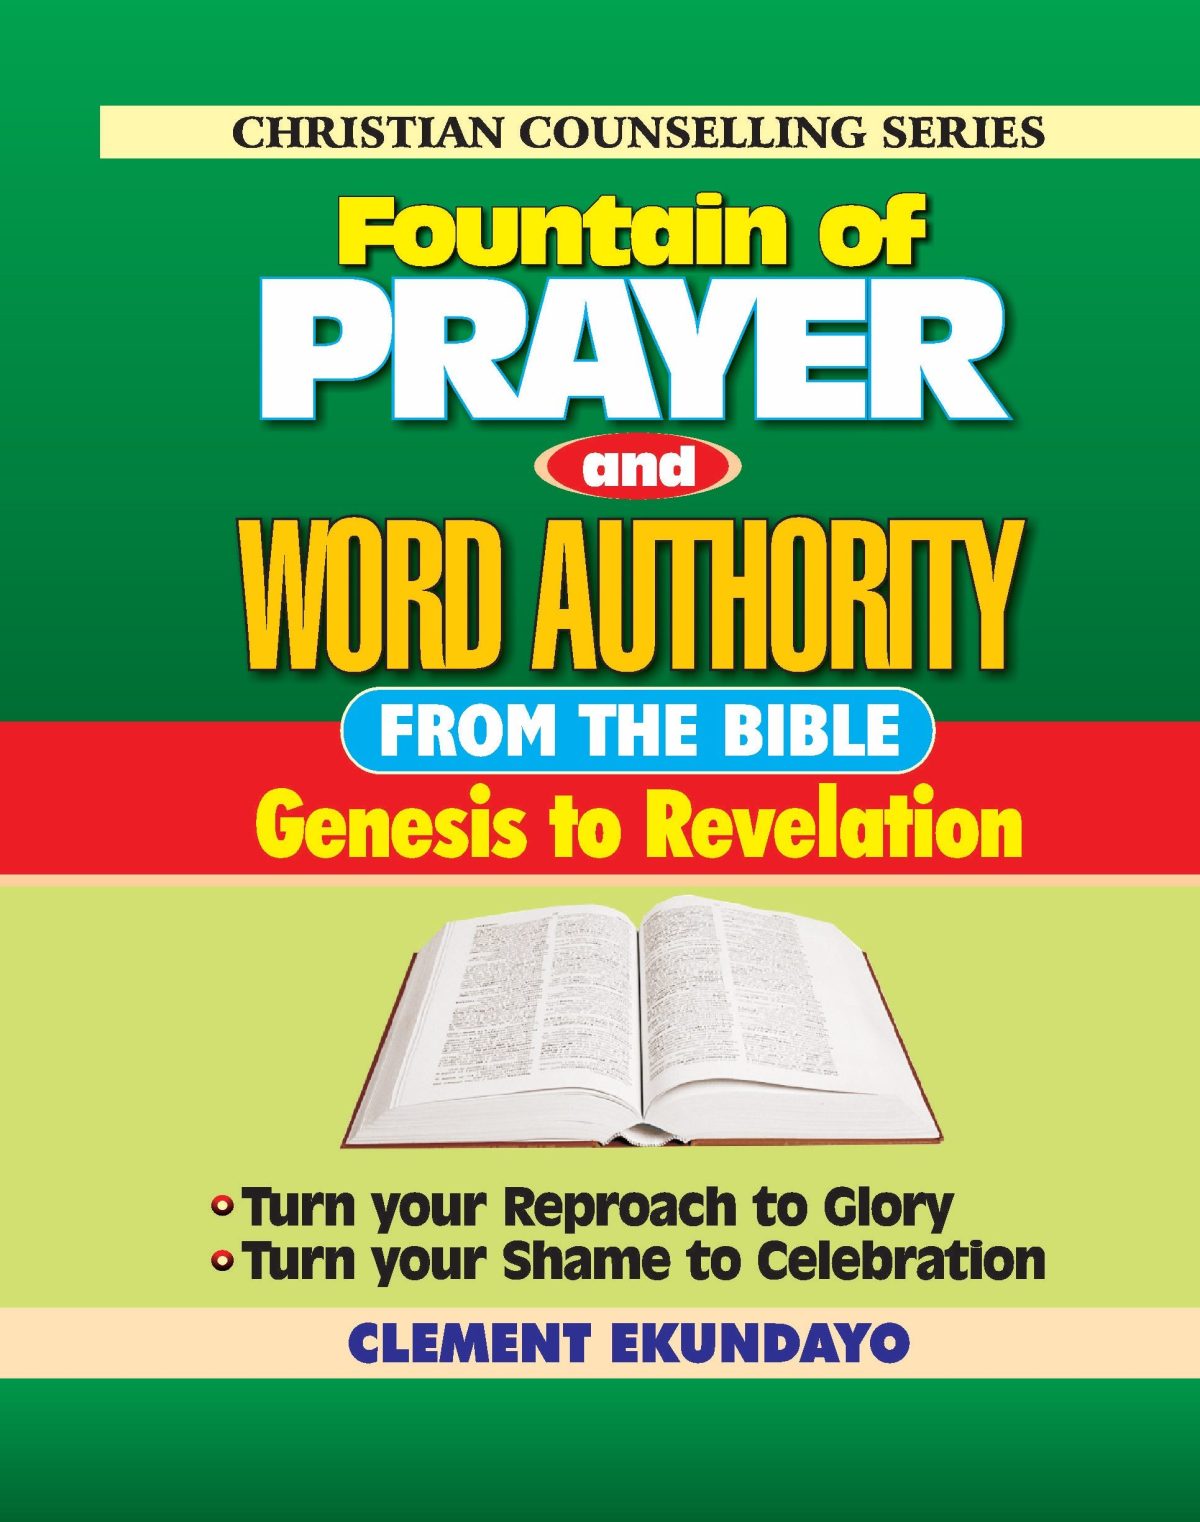 FOUNTAIN OF PRAYER AND WORD AUTHORITY FROM THE BIBLE